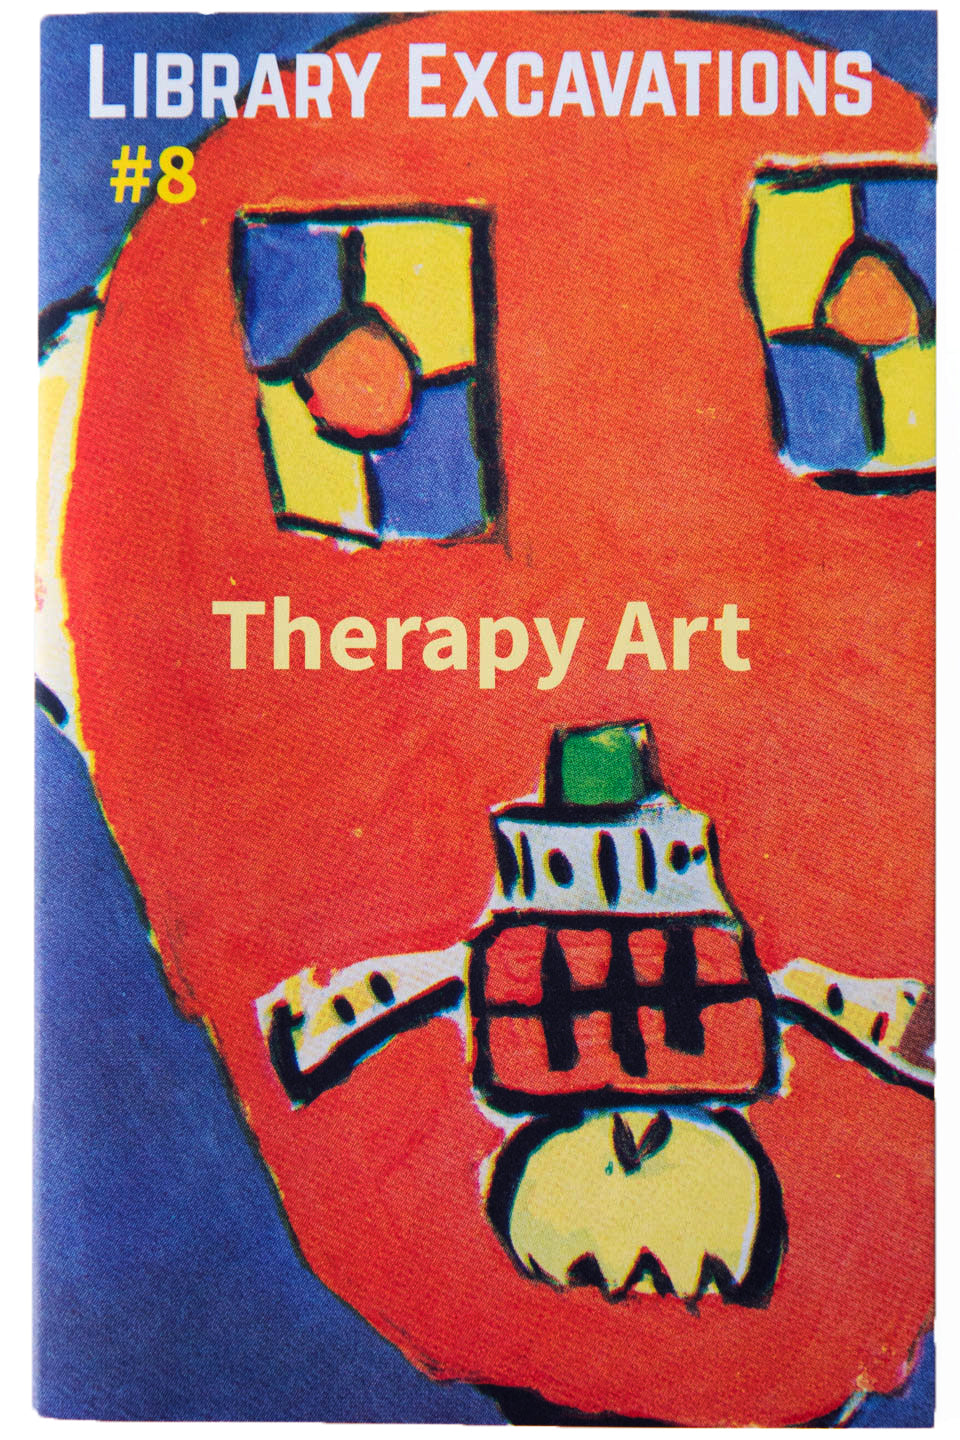 LIBRARY EXCAVATIONS #8 | Therapy Art